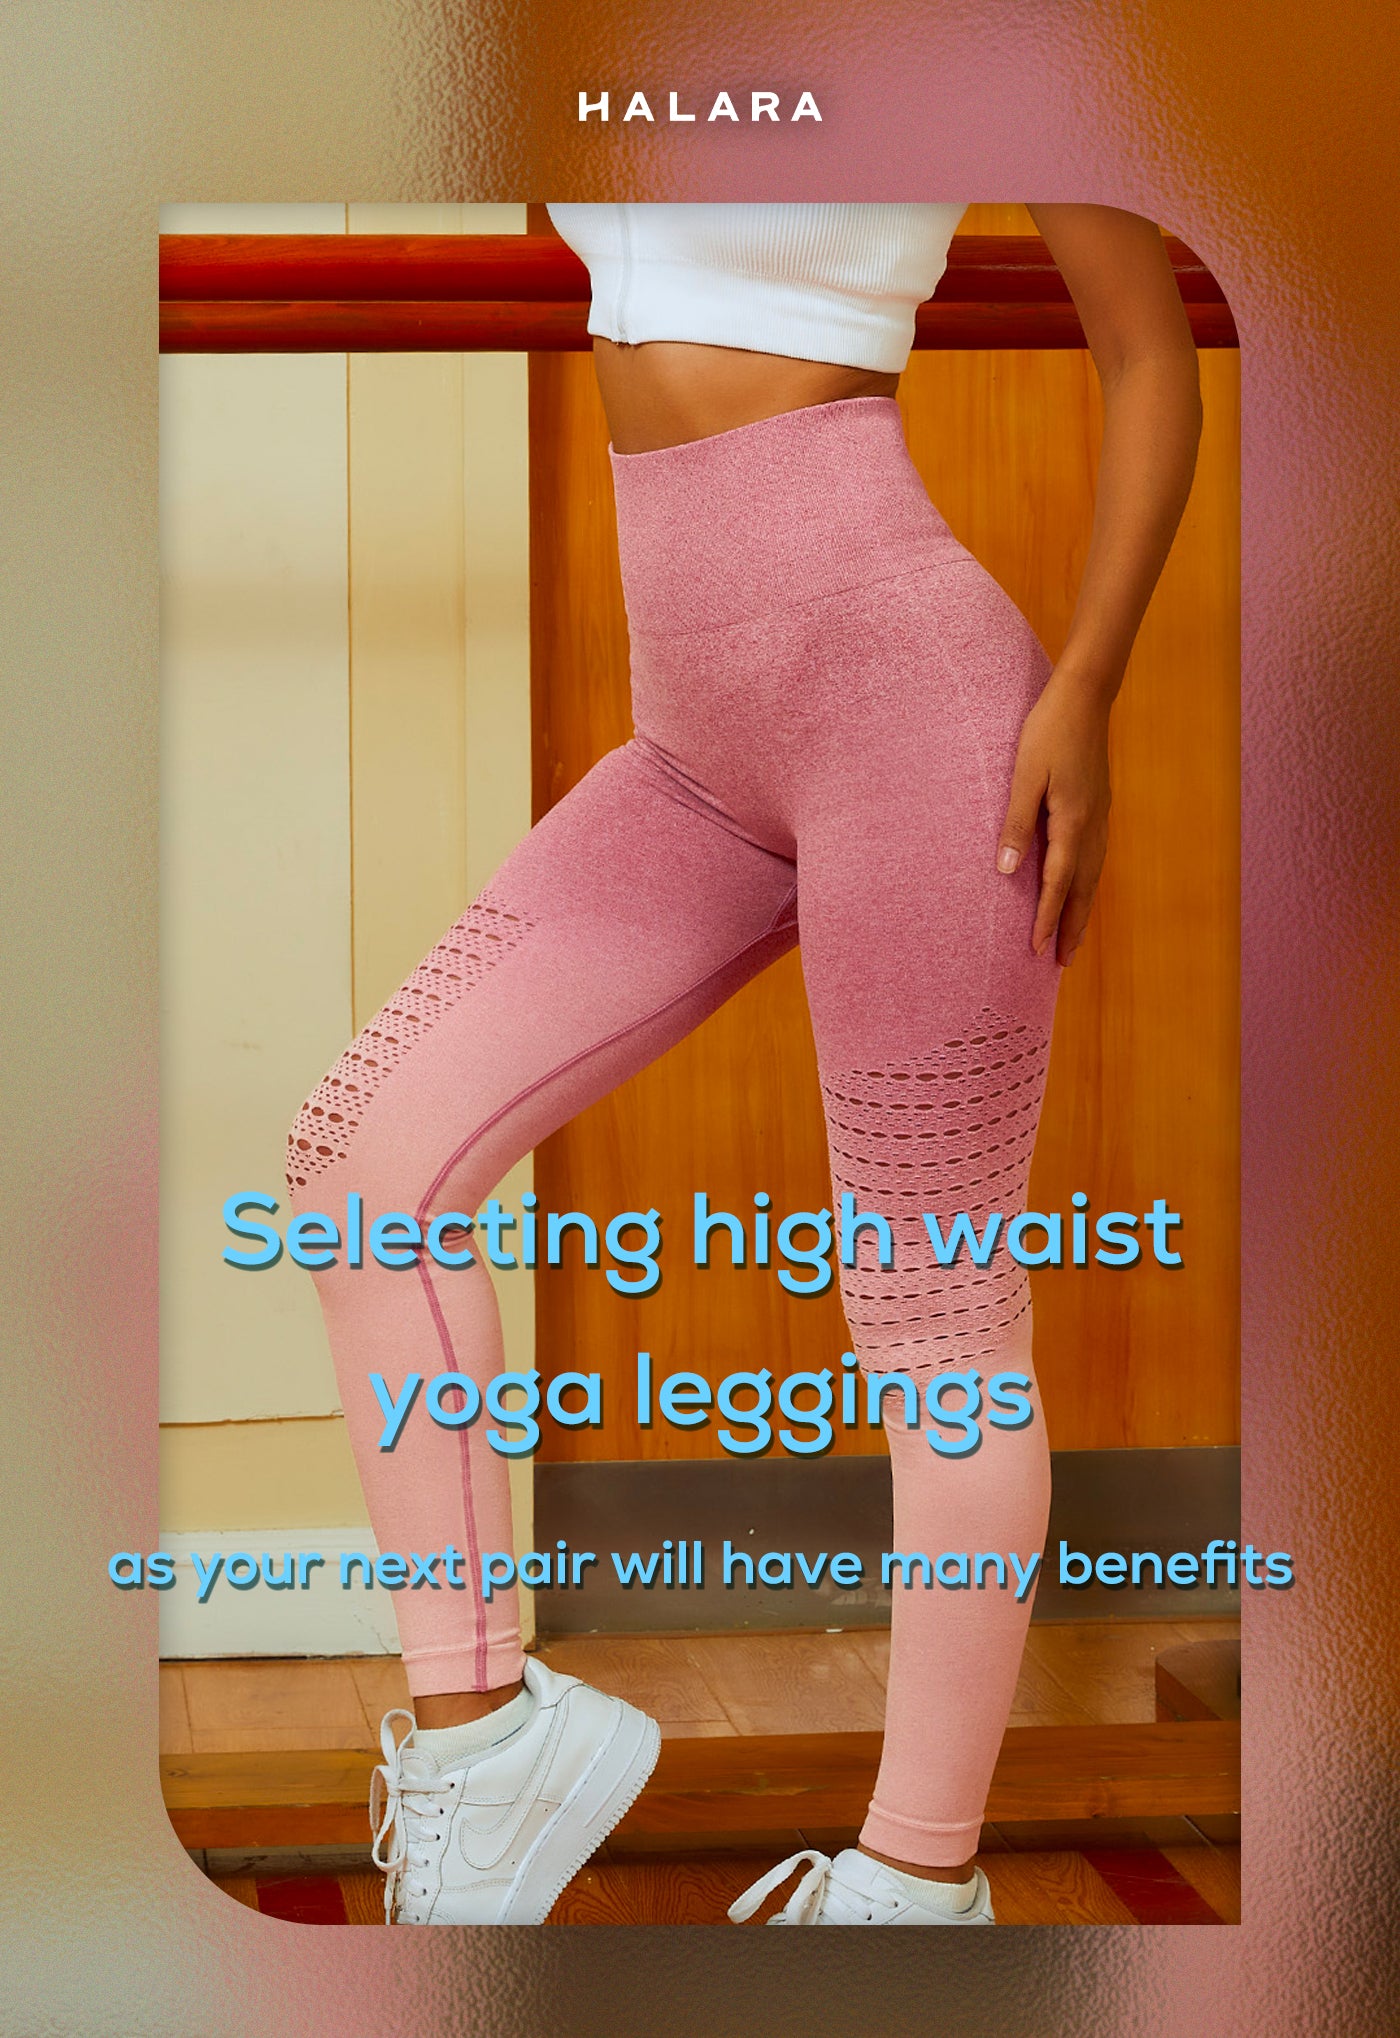 Selecting high waist yoga leggings as your next pair will have many